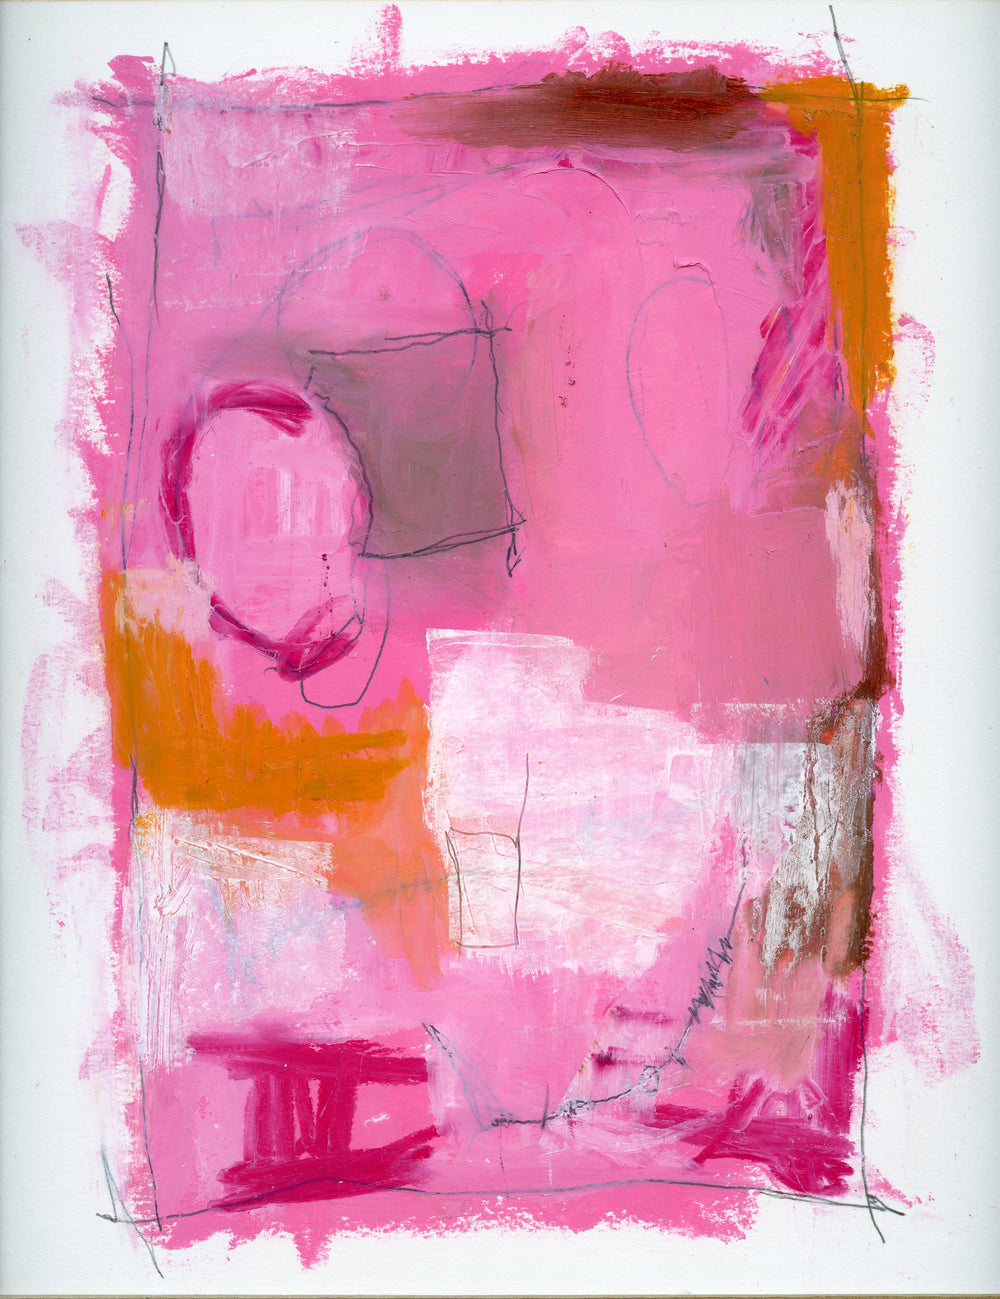 abstract oil pastel drawing featuring hues of pink, orange and white